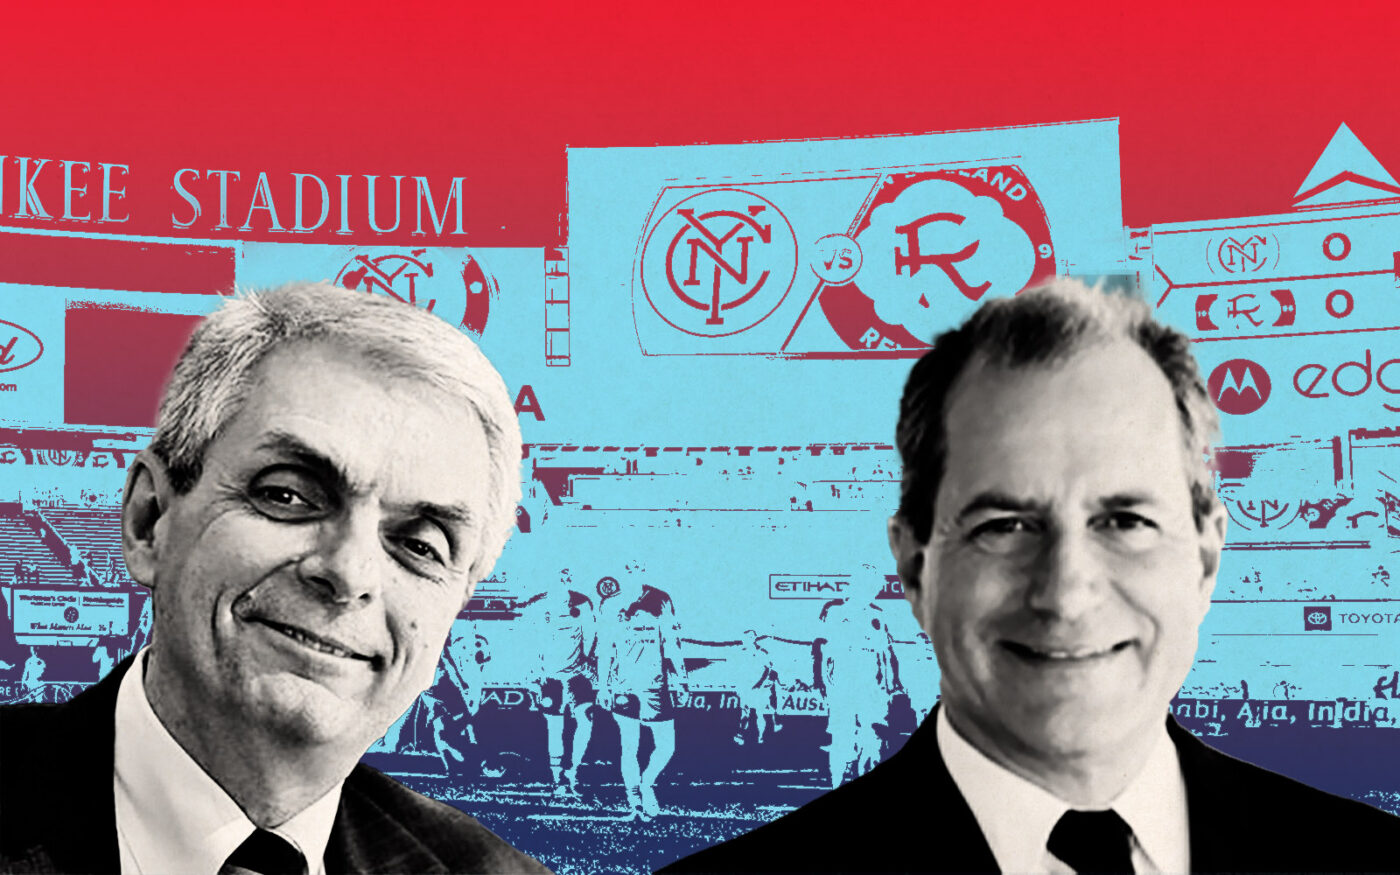 NYCFC Selects HOK and Turner Construction Company to Design and